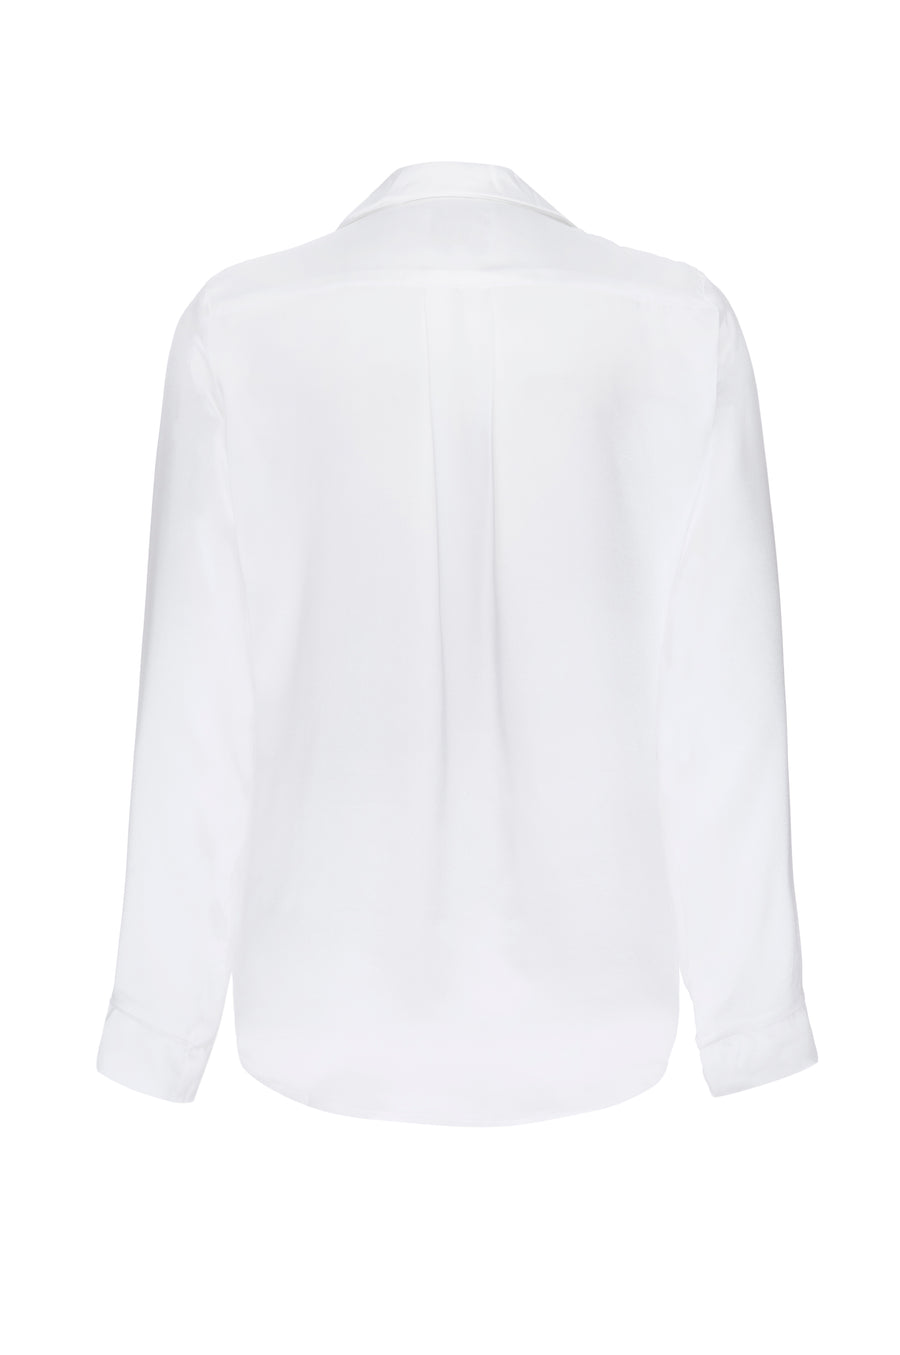 Silk Charmeuse Long Sleeved Top: Ivory